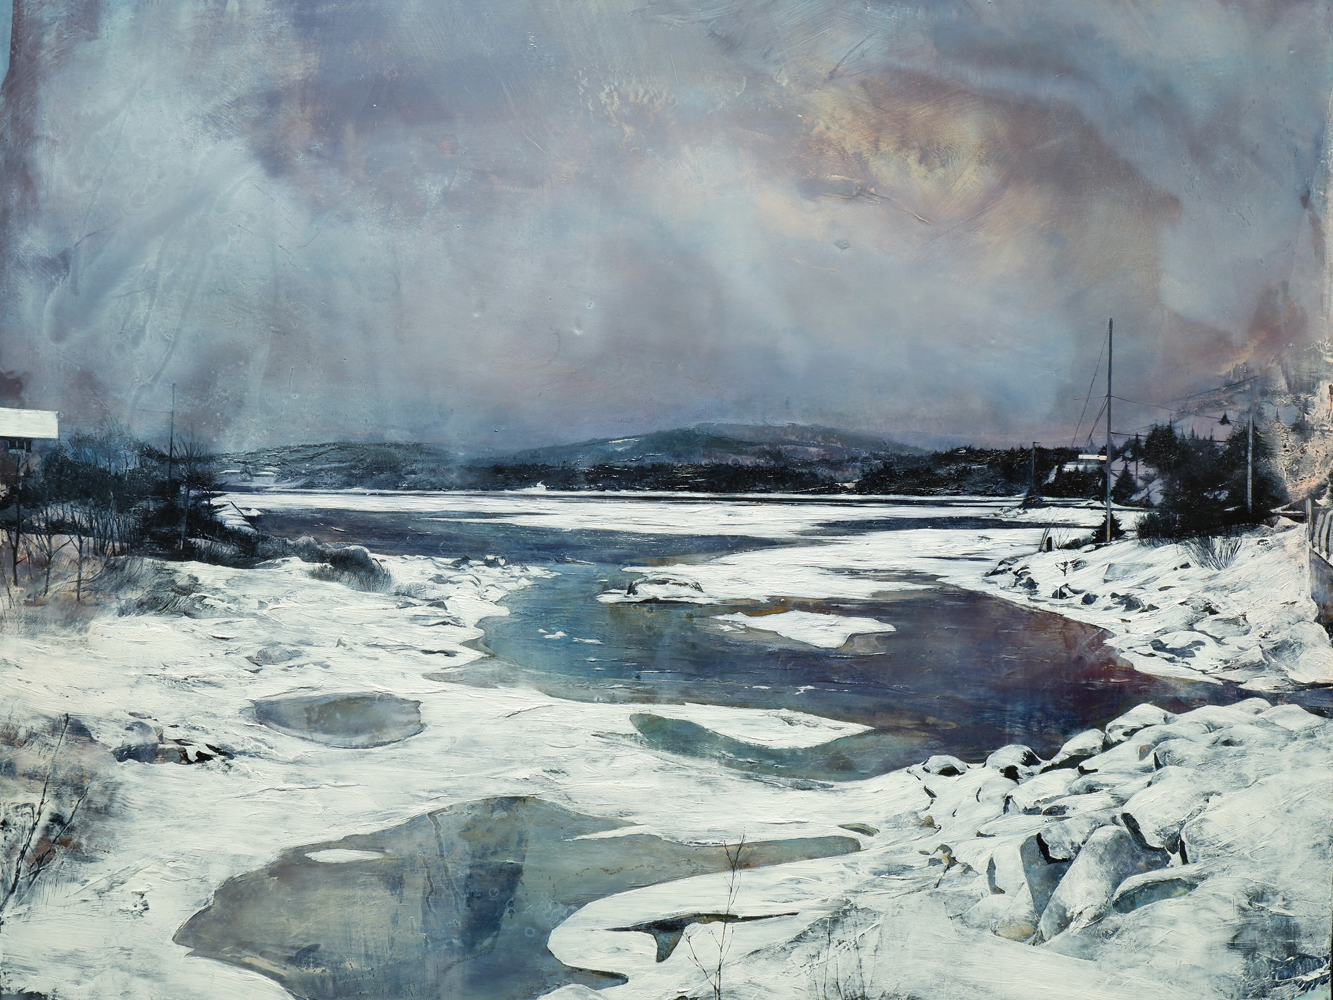 Mark Thompson, I Came Here to Stay, 2021, oil on panel, 33 x 43 inches, $7500.